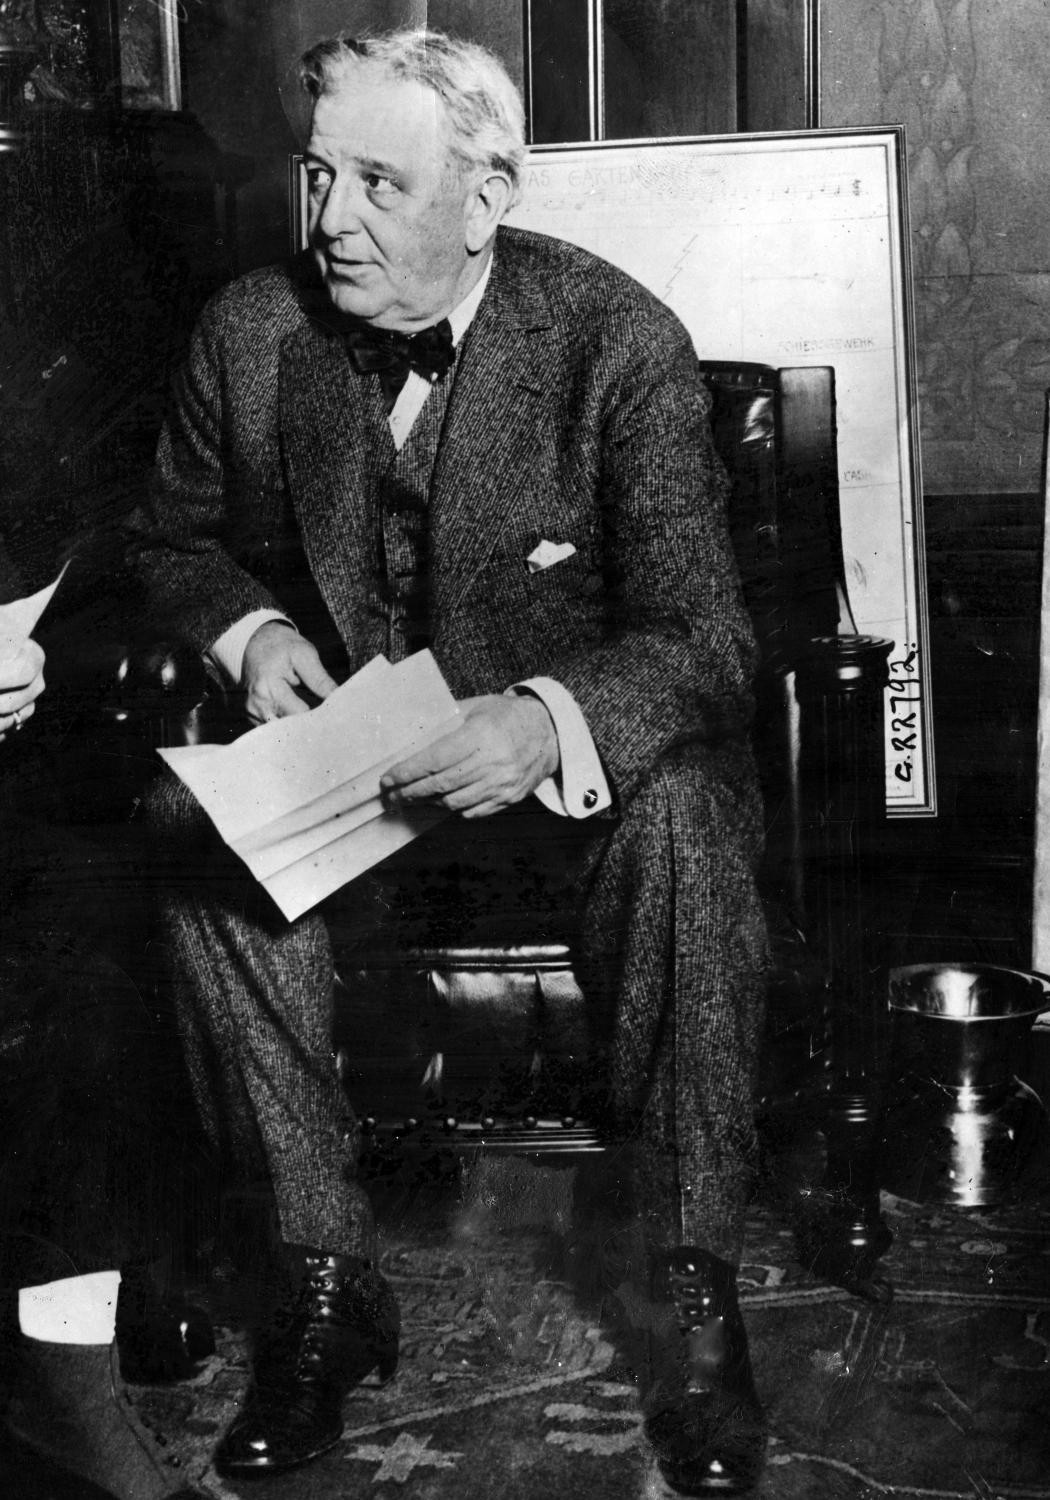 Chicago White Sox owner Charles Comiskey had a reputation for meanness - even refusing to pay for laundry, leading the players to not wash their kit and earning the nickname the "Black Sox" ©Getty Images